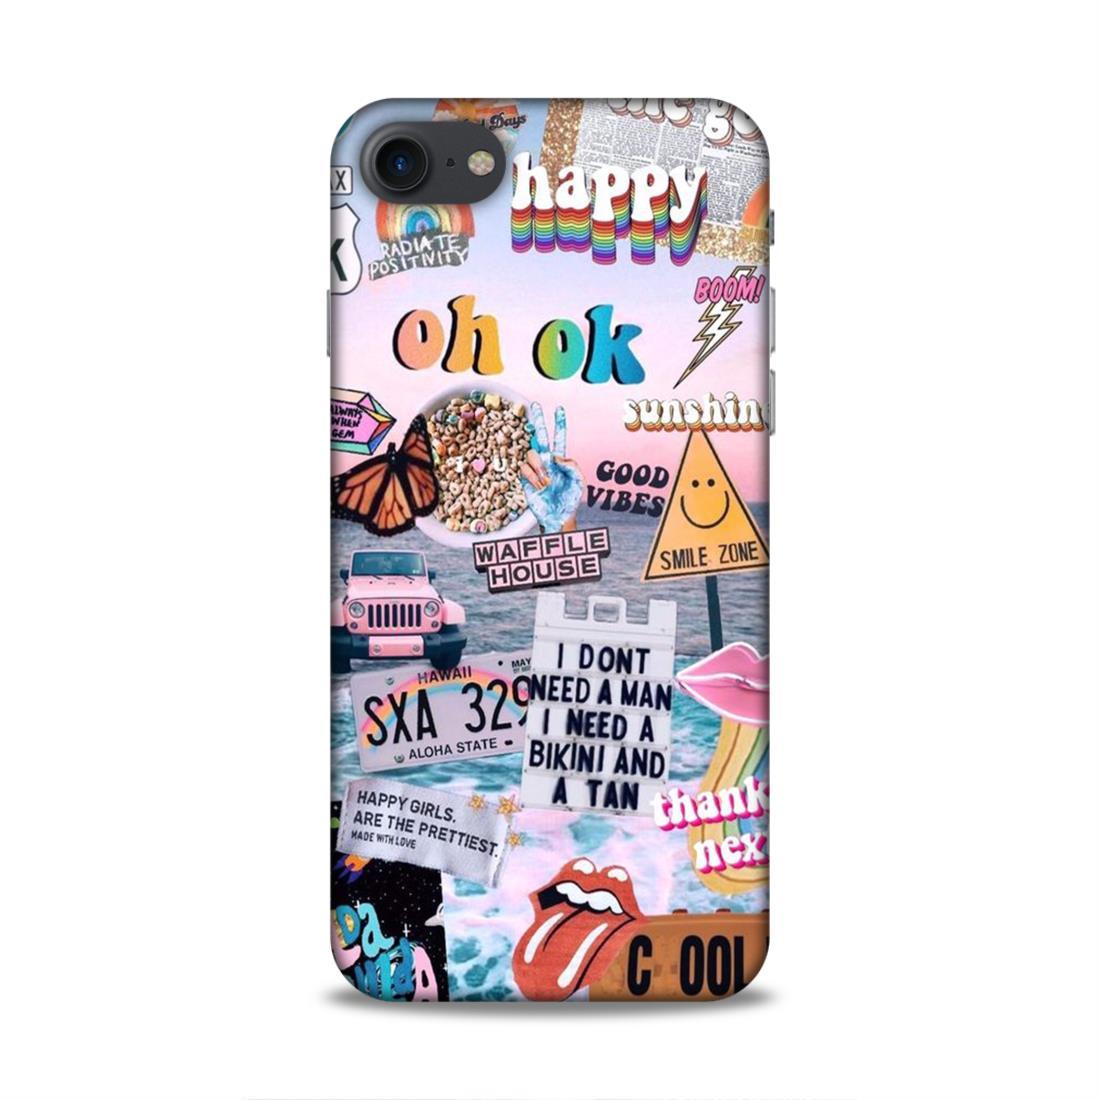 Oh Ok Happy iPhone 7 Phone Case Cover